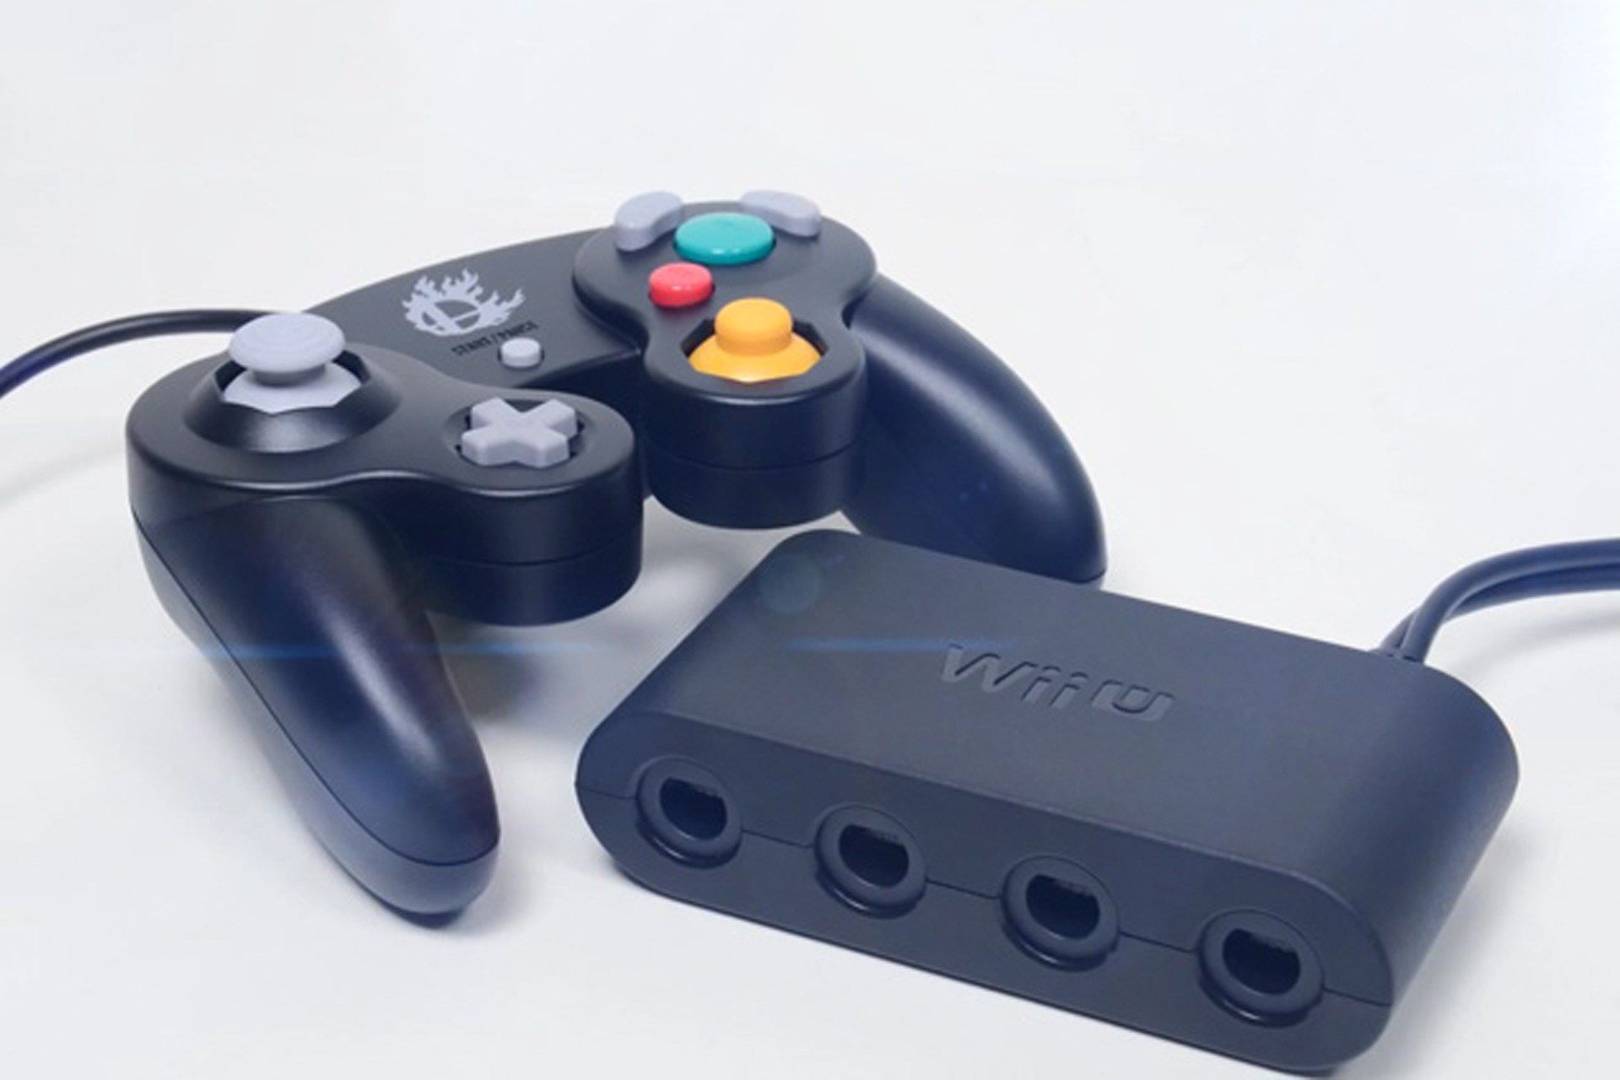 wii games you can play with gamecube controller